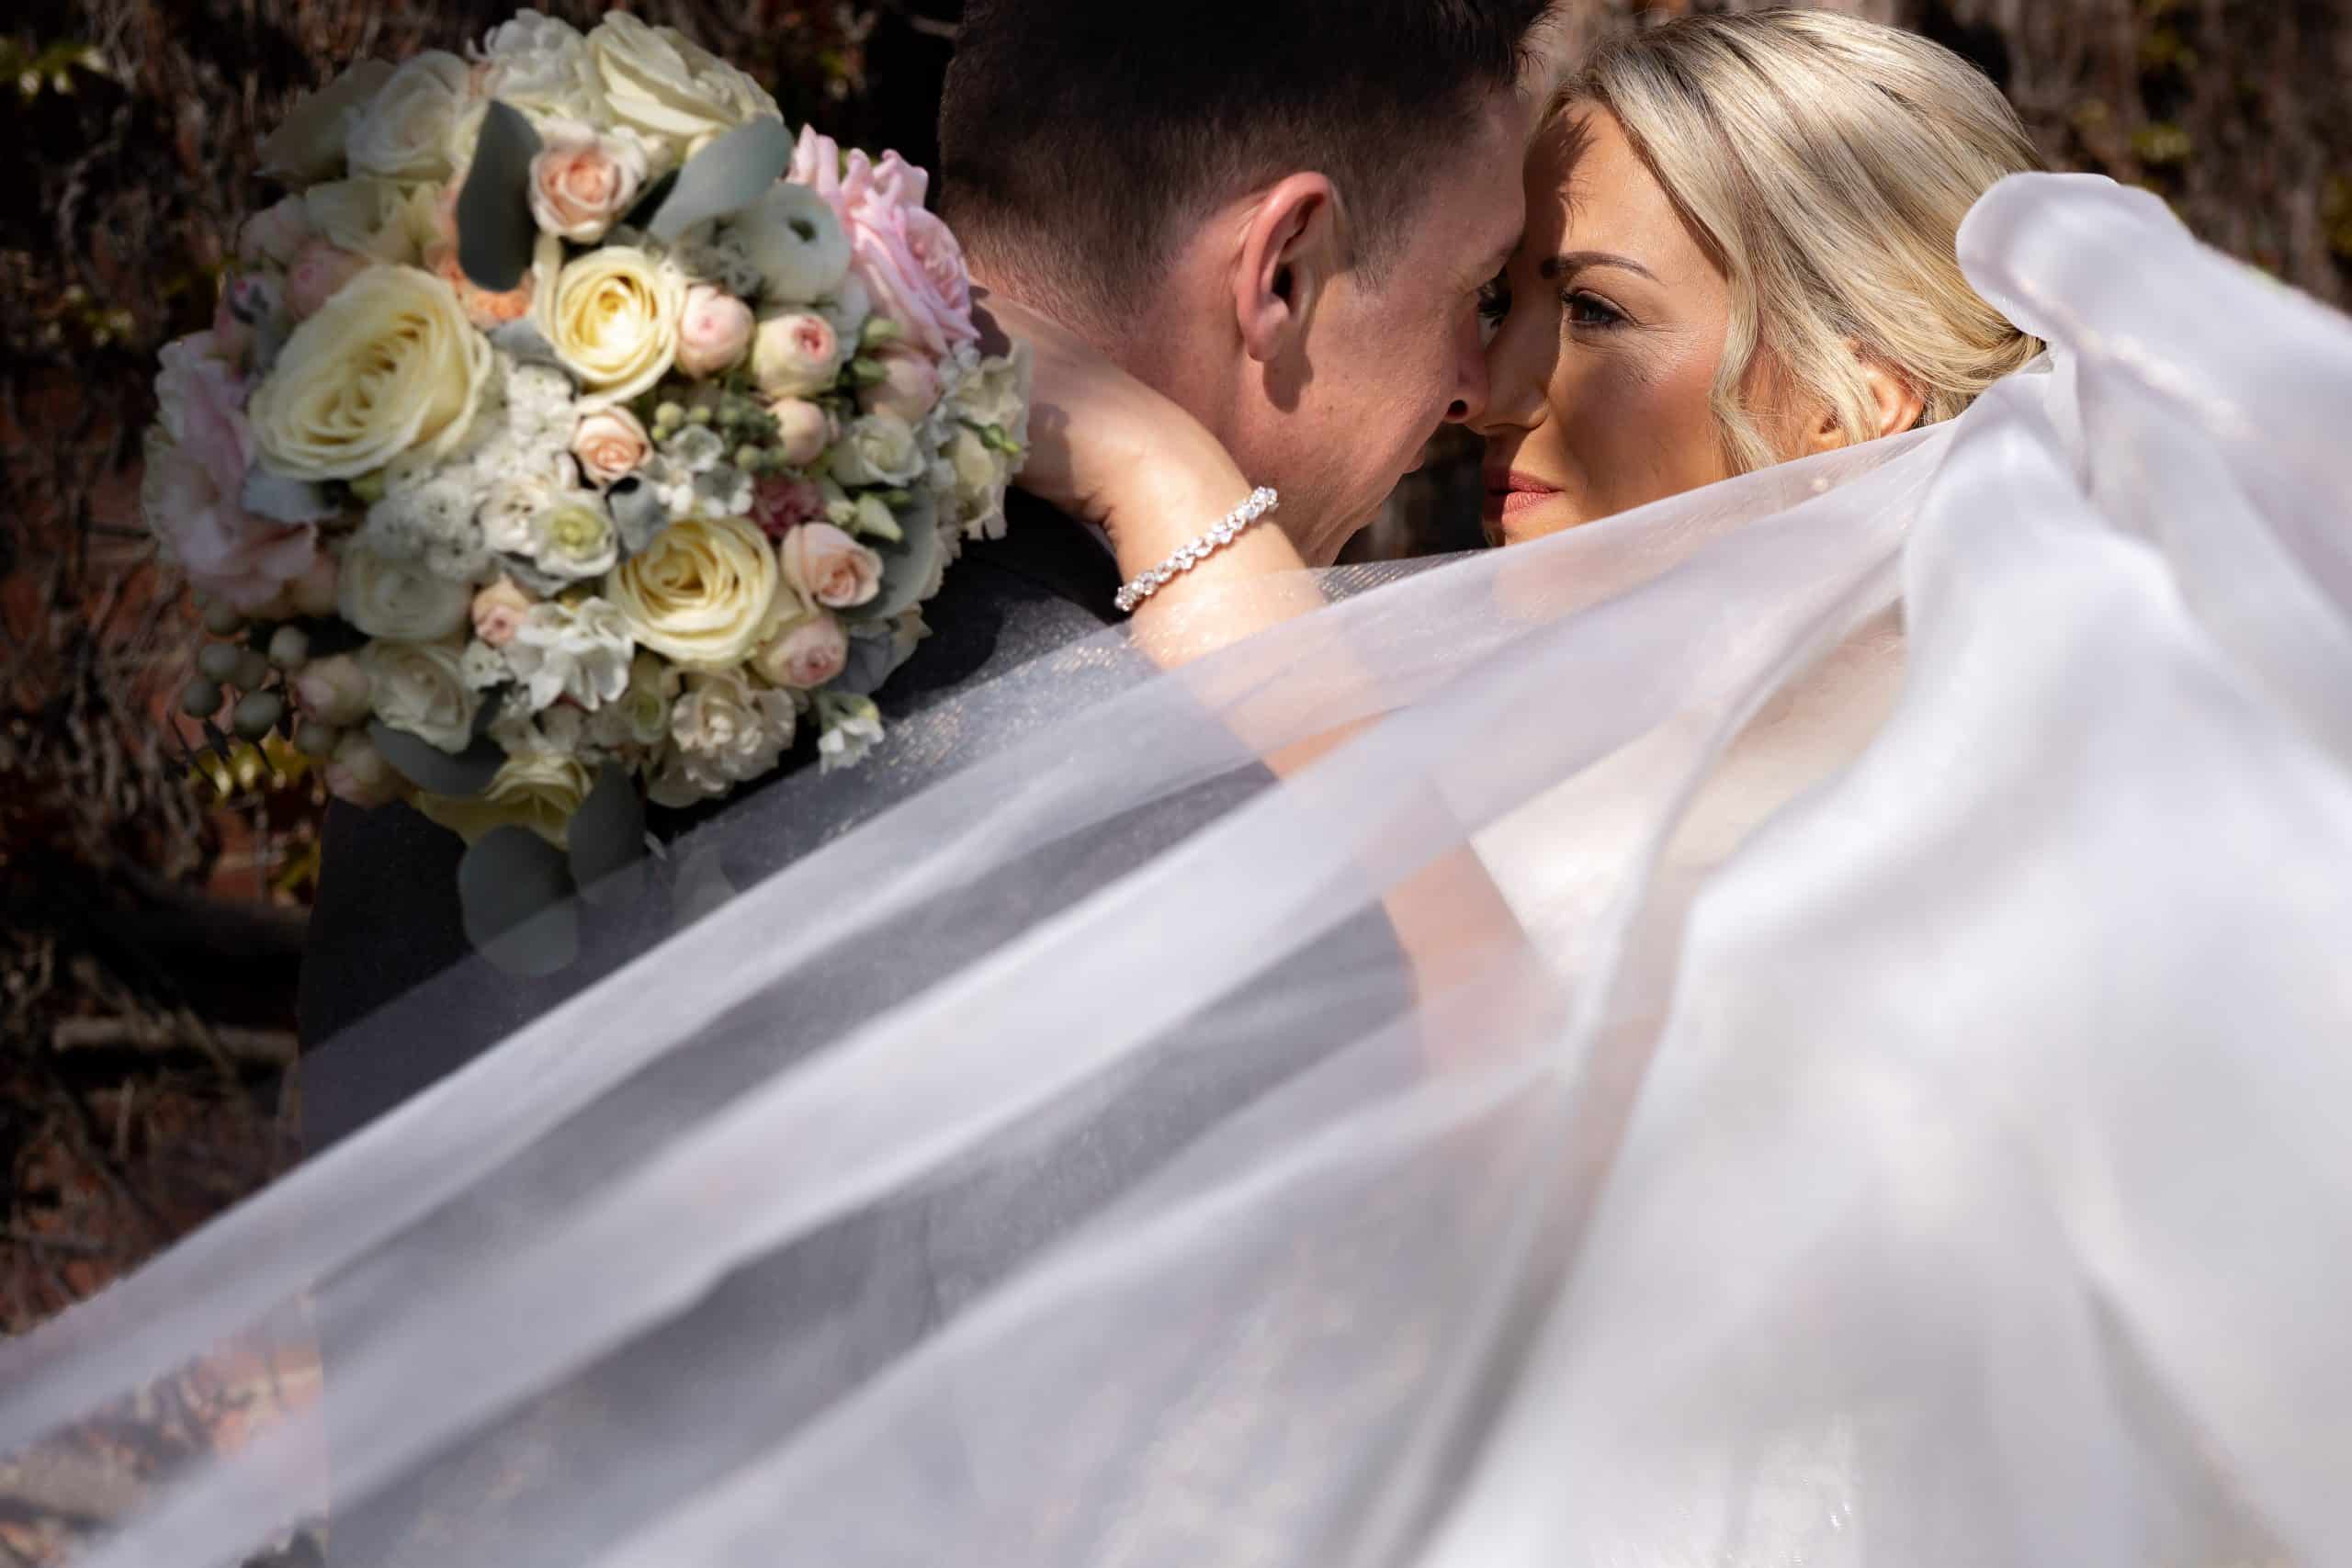 bridal-couple-in-a-hug-under-the-white-veil-at-bedford-school-chapel